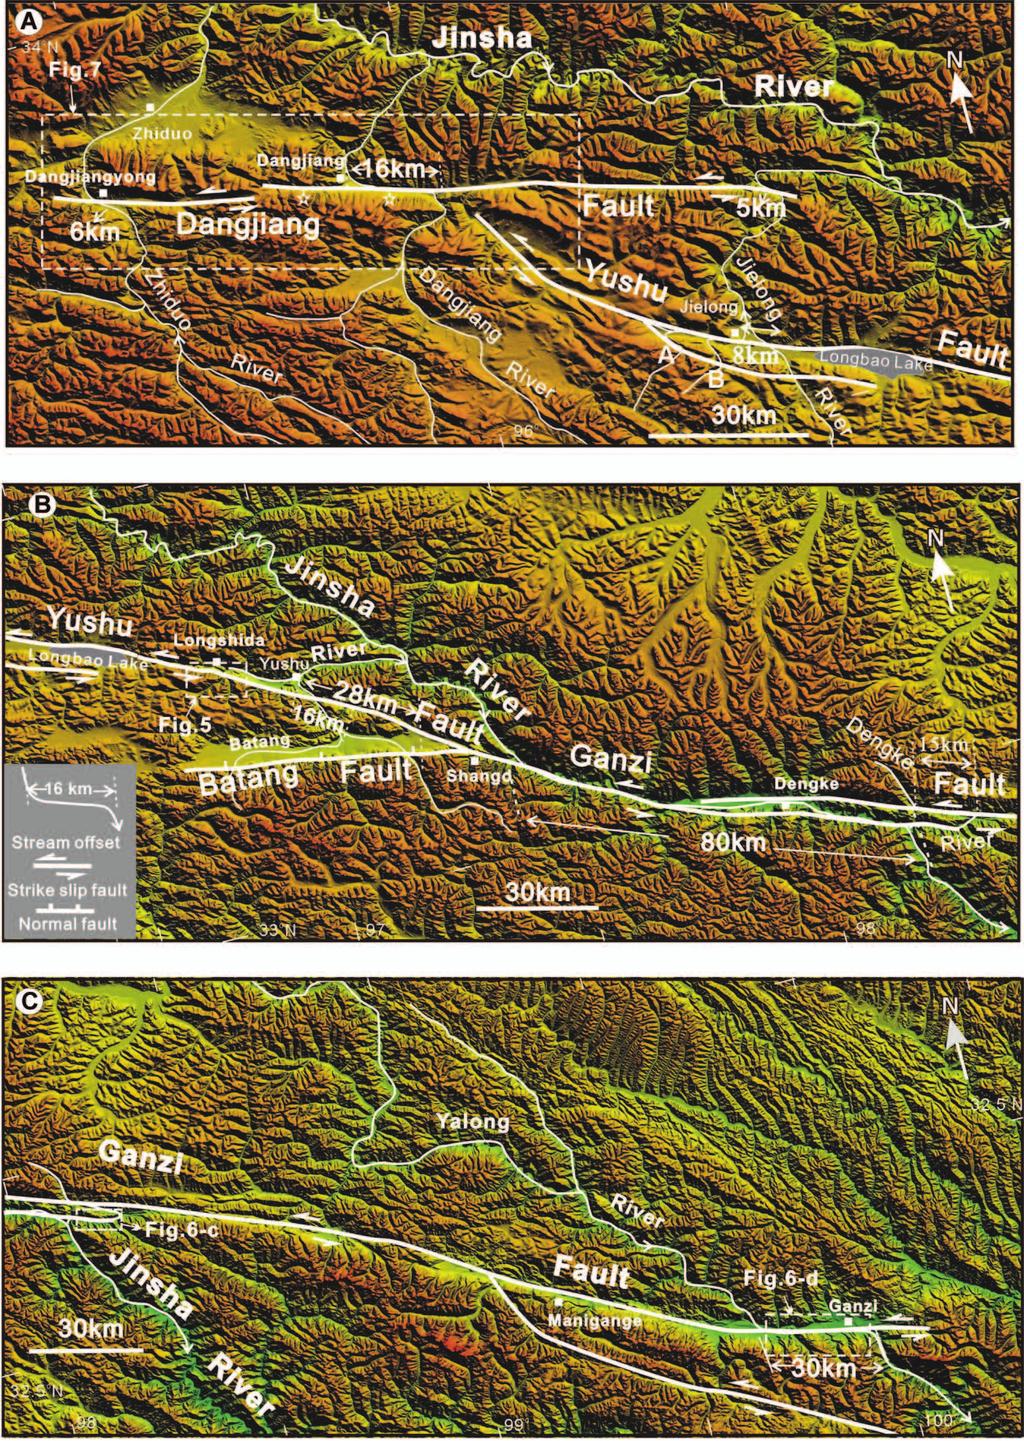 WANG SHIFENG ET AL. 626 FIG. 2. Drainage basin of the Jinsha River and active fault trace of the Ganzi Yushu segment of the XSF. Channel deflections of some Jinsha River tributaries are also shown.